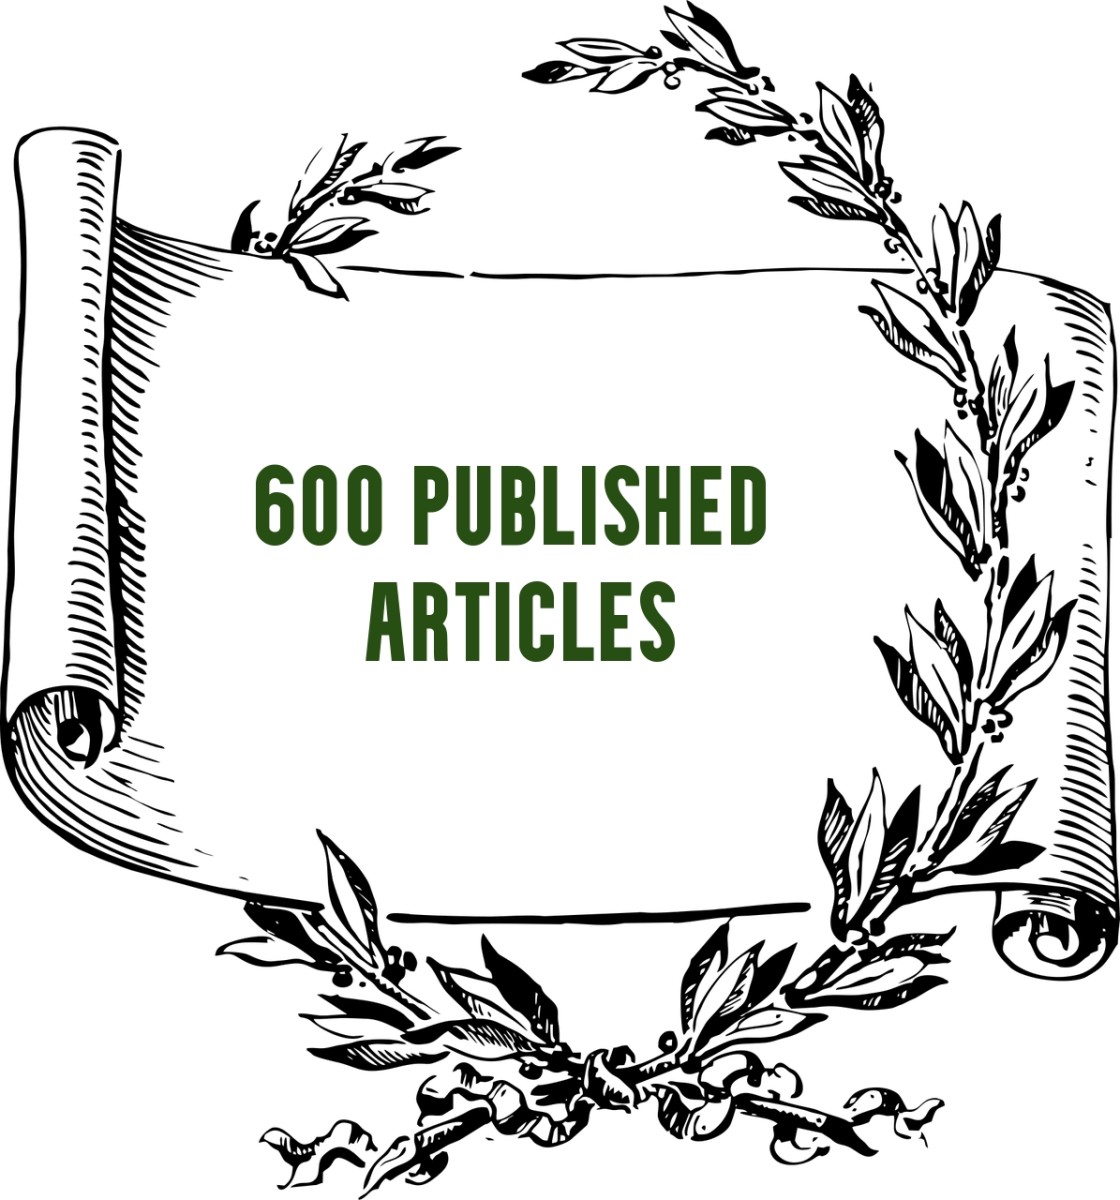 My 600th Published Article